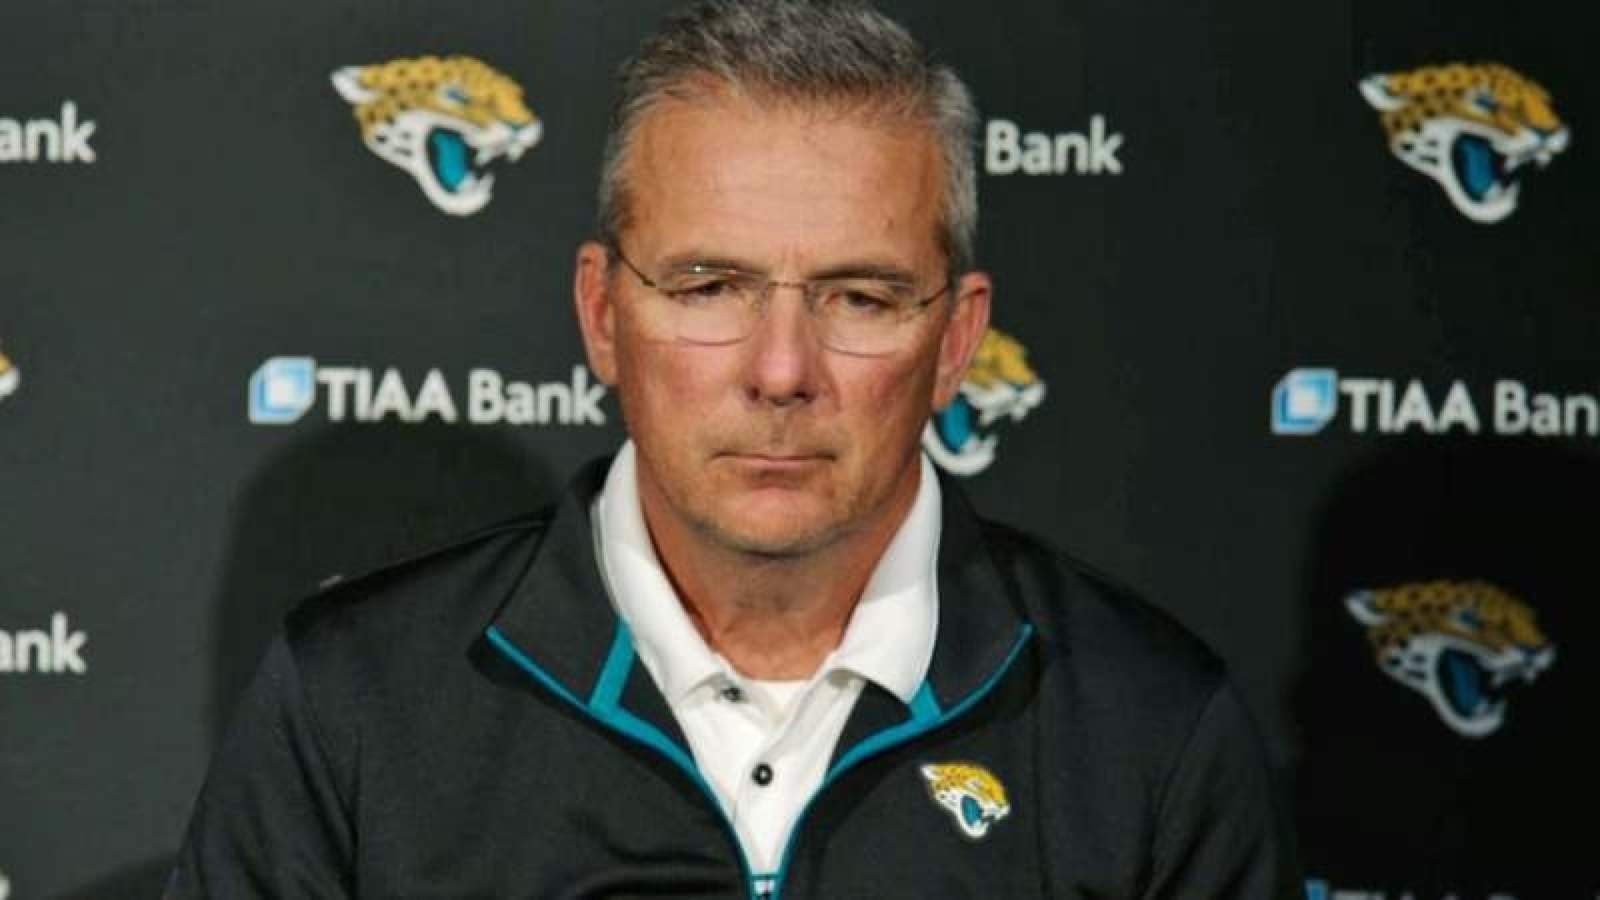 Urban Meyer hopes Jaguars coaching staff is complete by next week